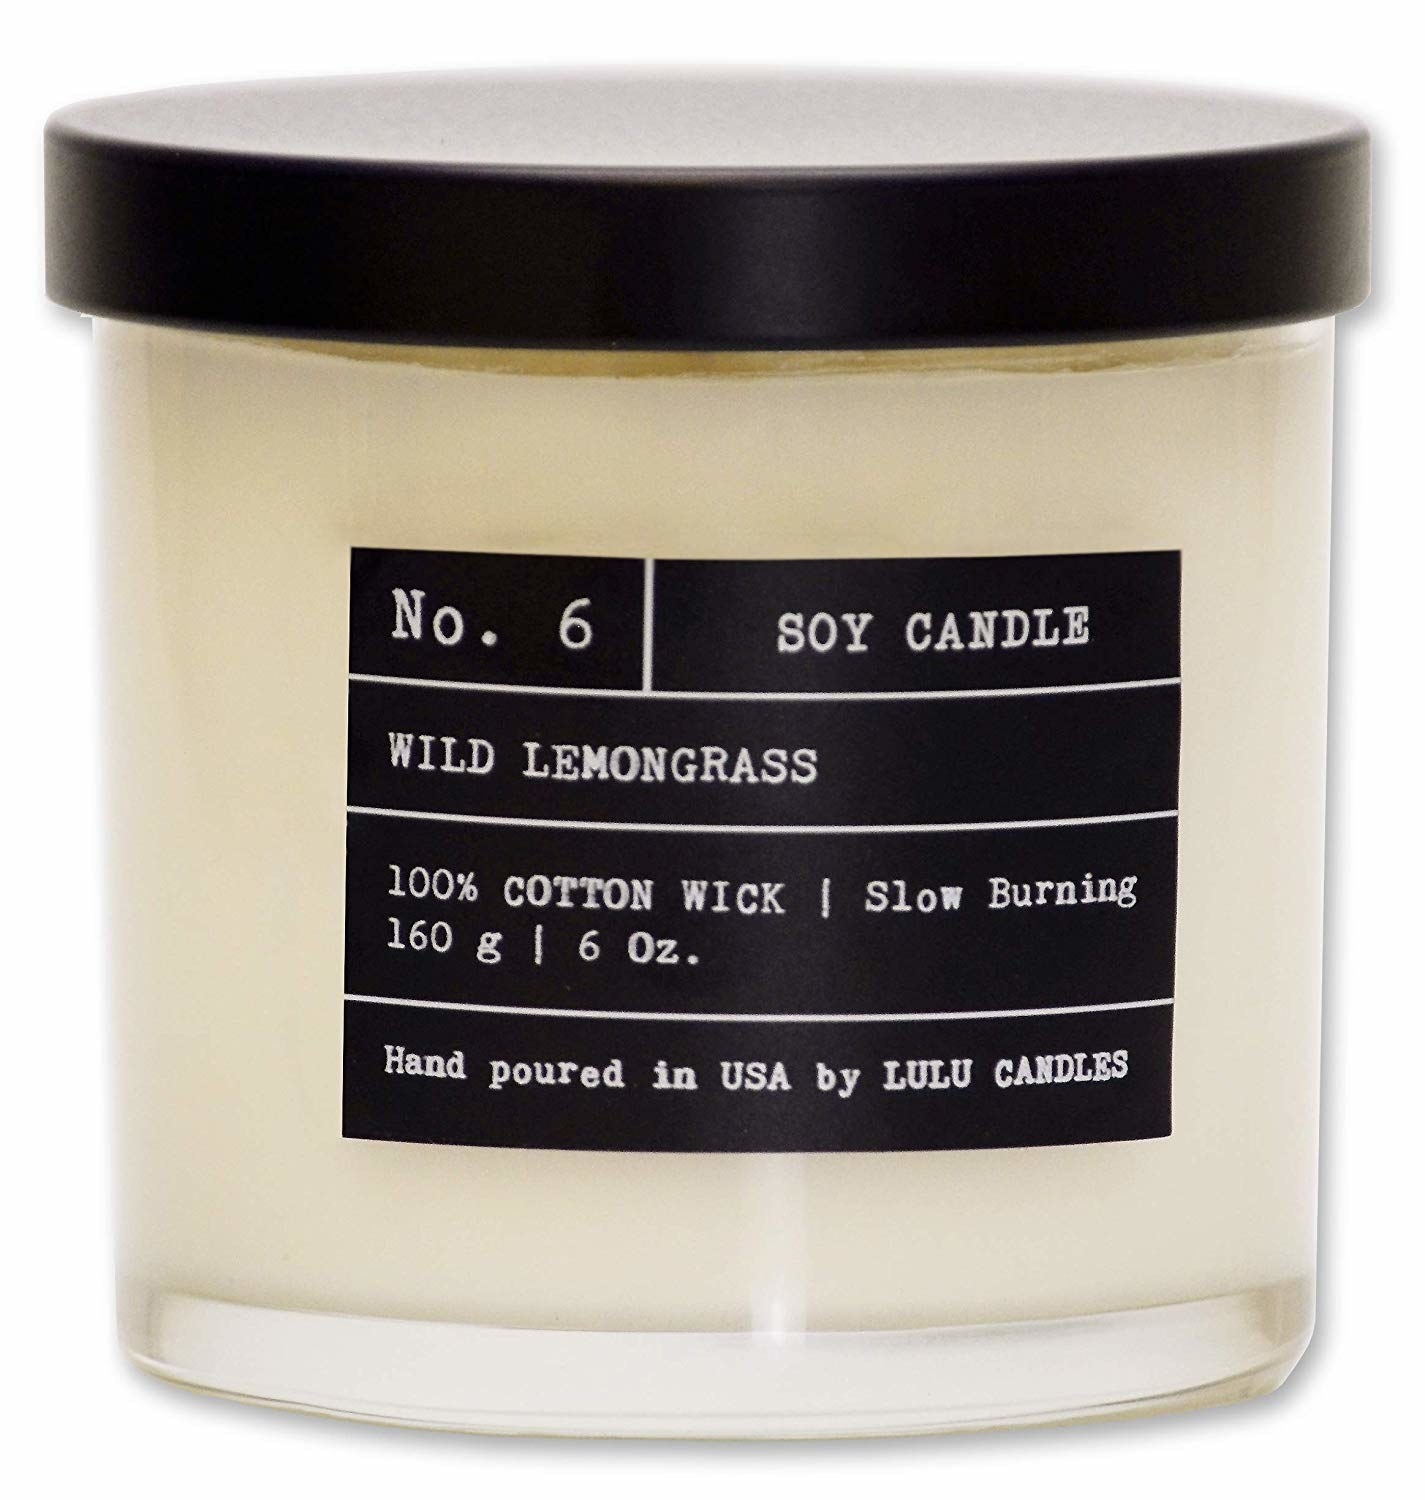 The candle, with a cotton wick, hand-poured in the USA